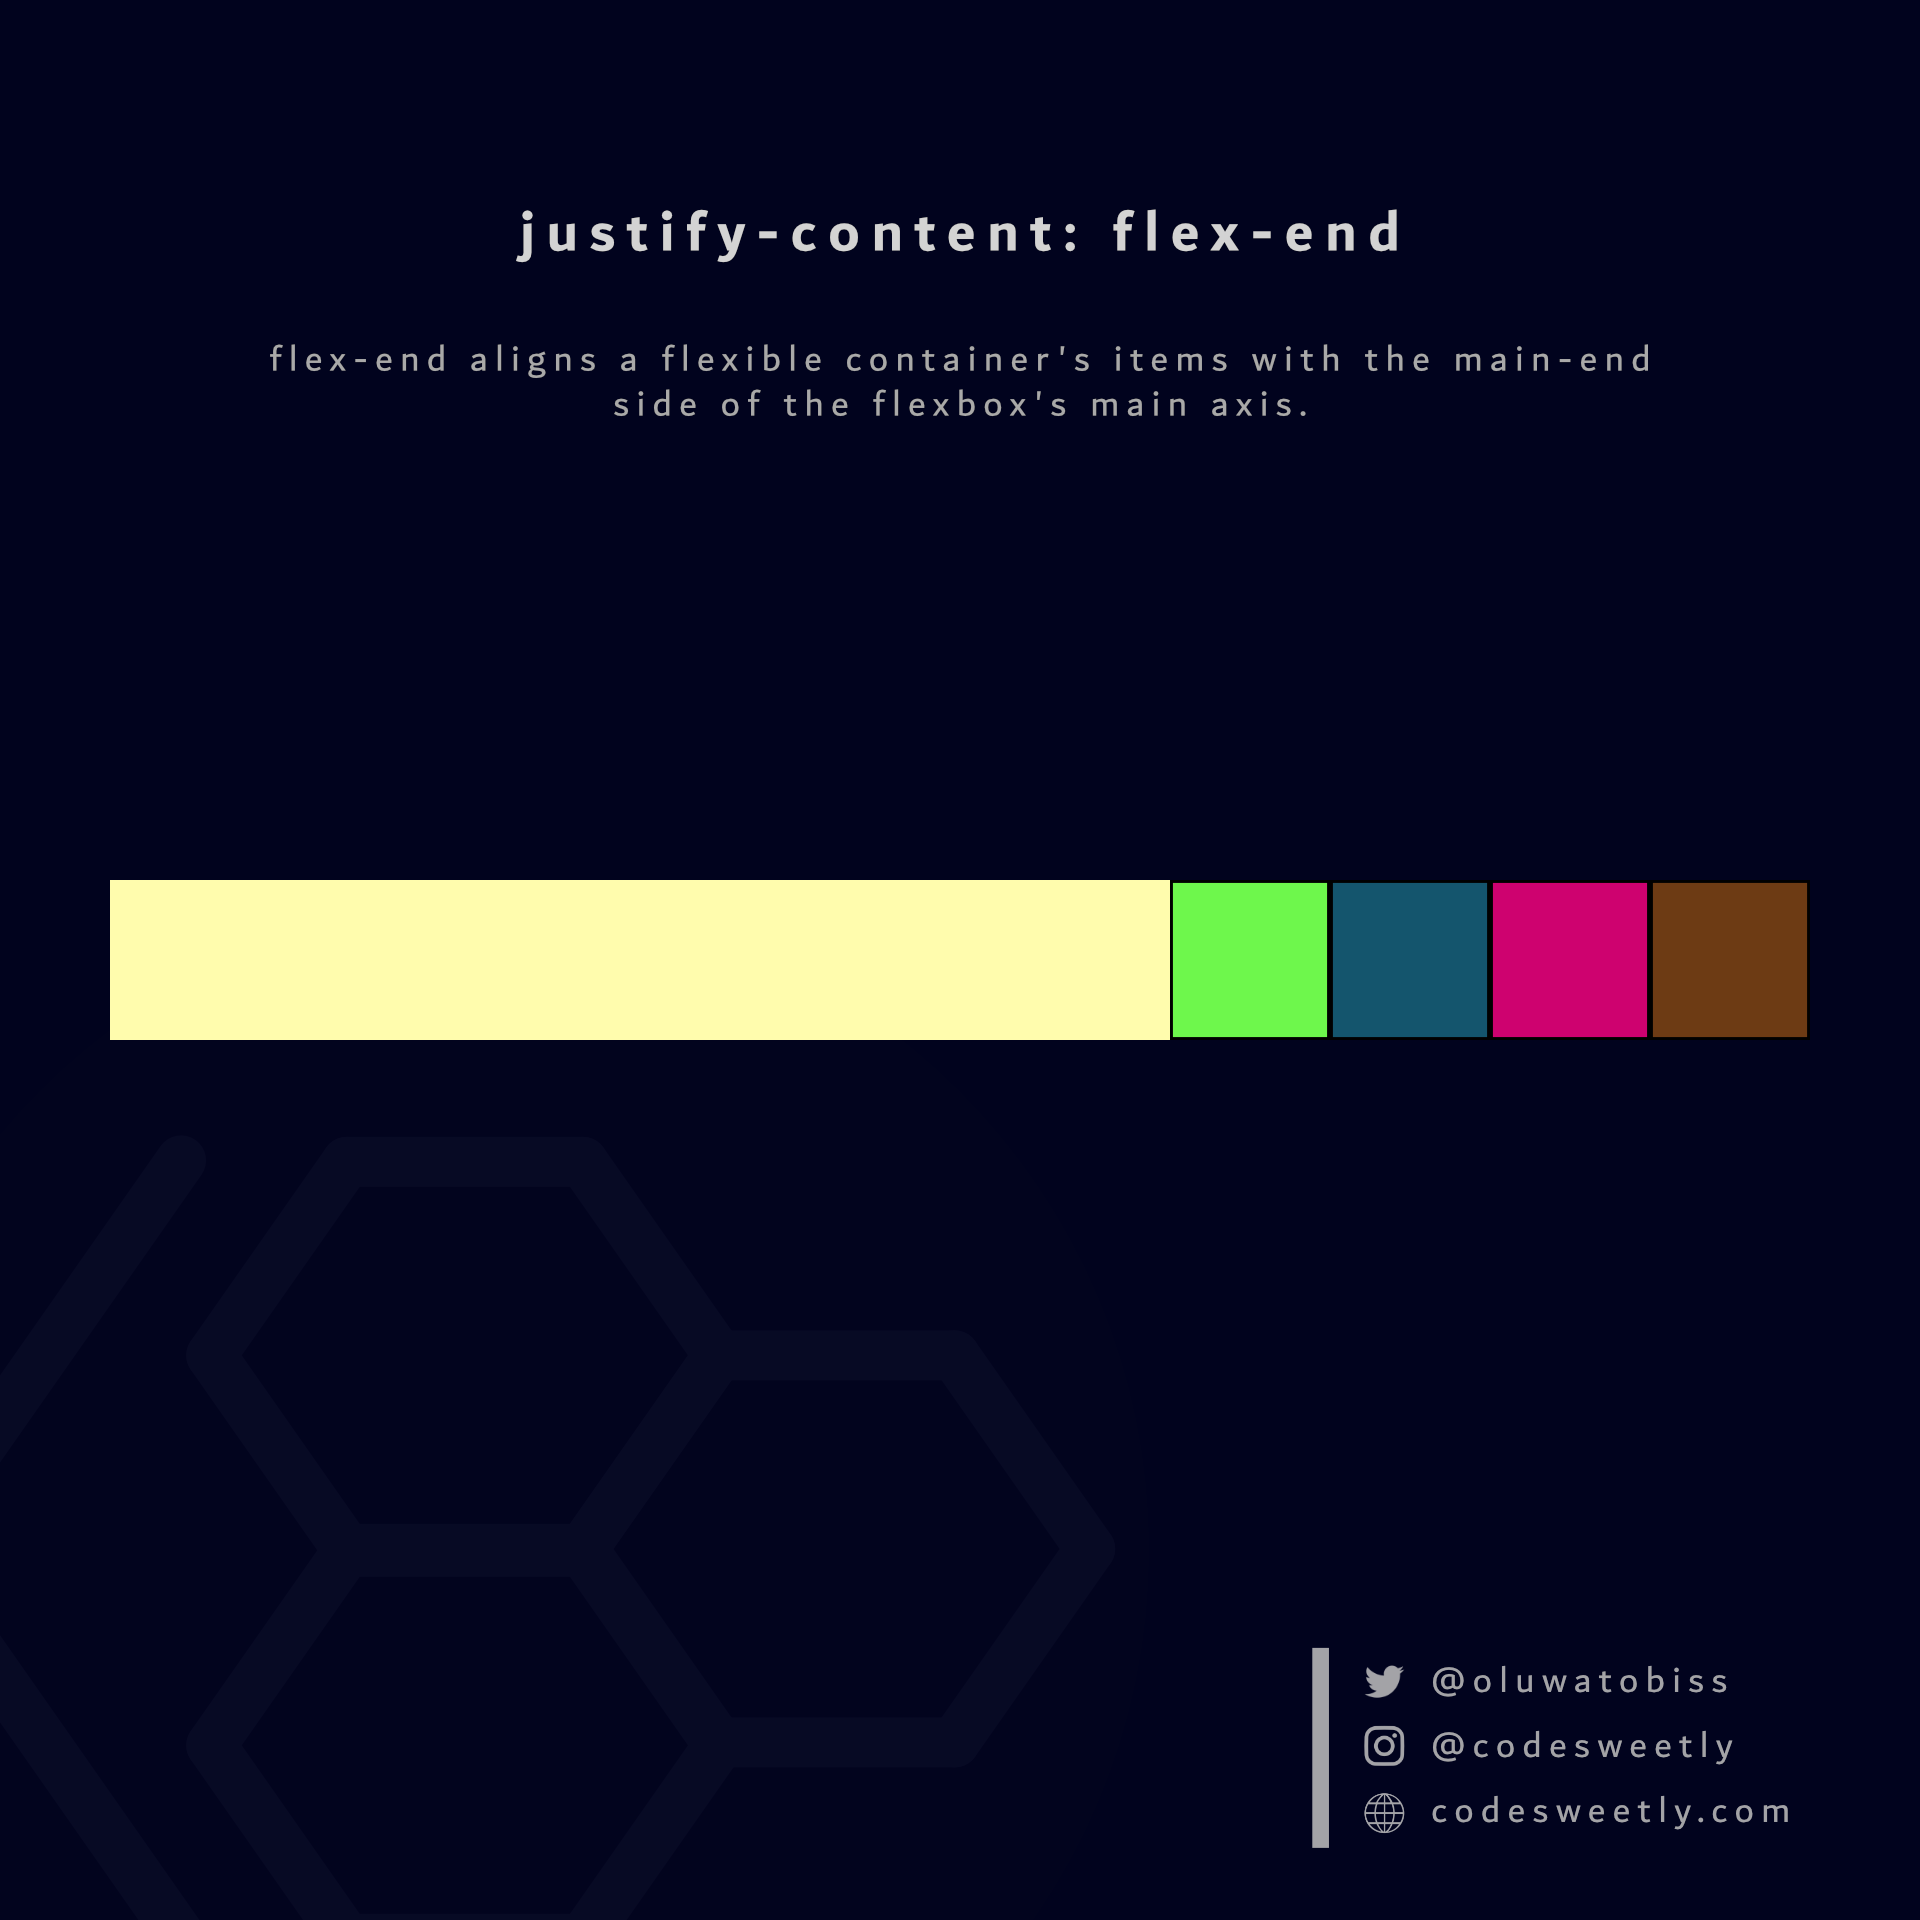 justify-content's flex-end value aligns flexible items to the flexbox's main-end side